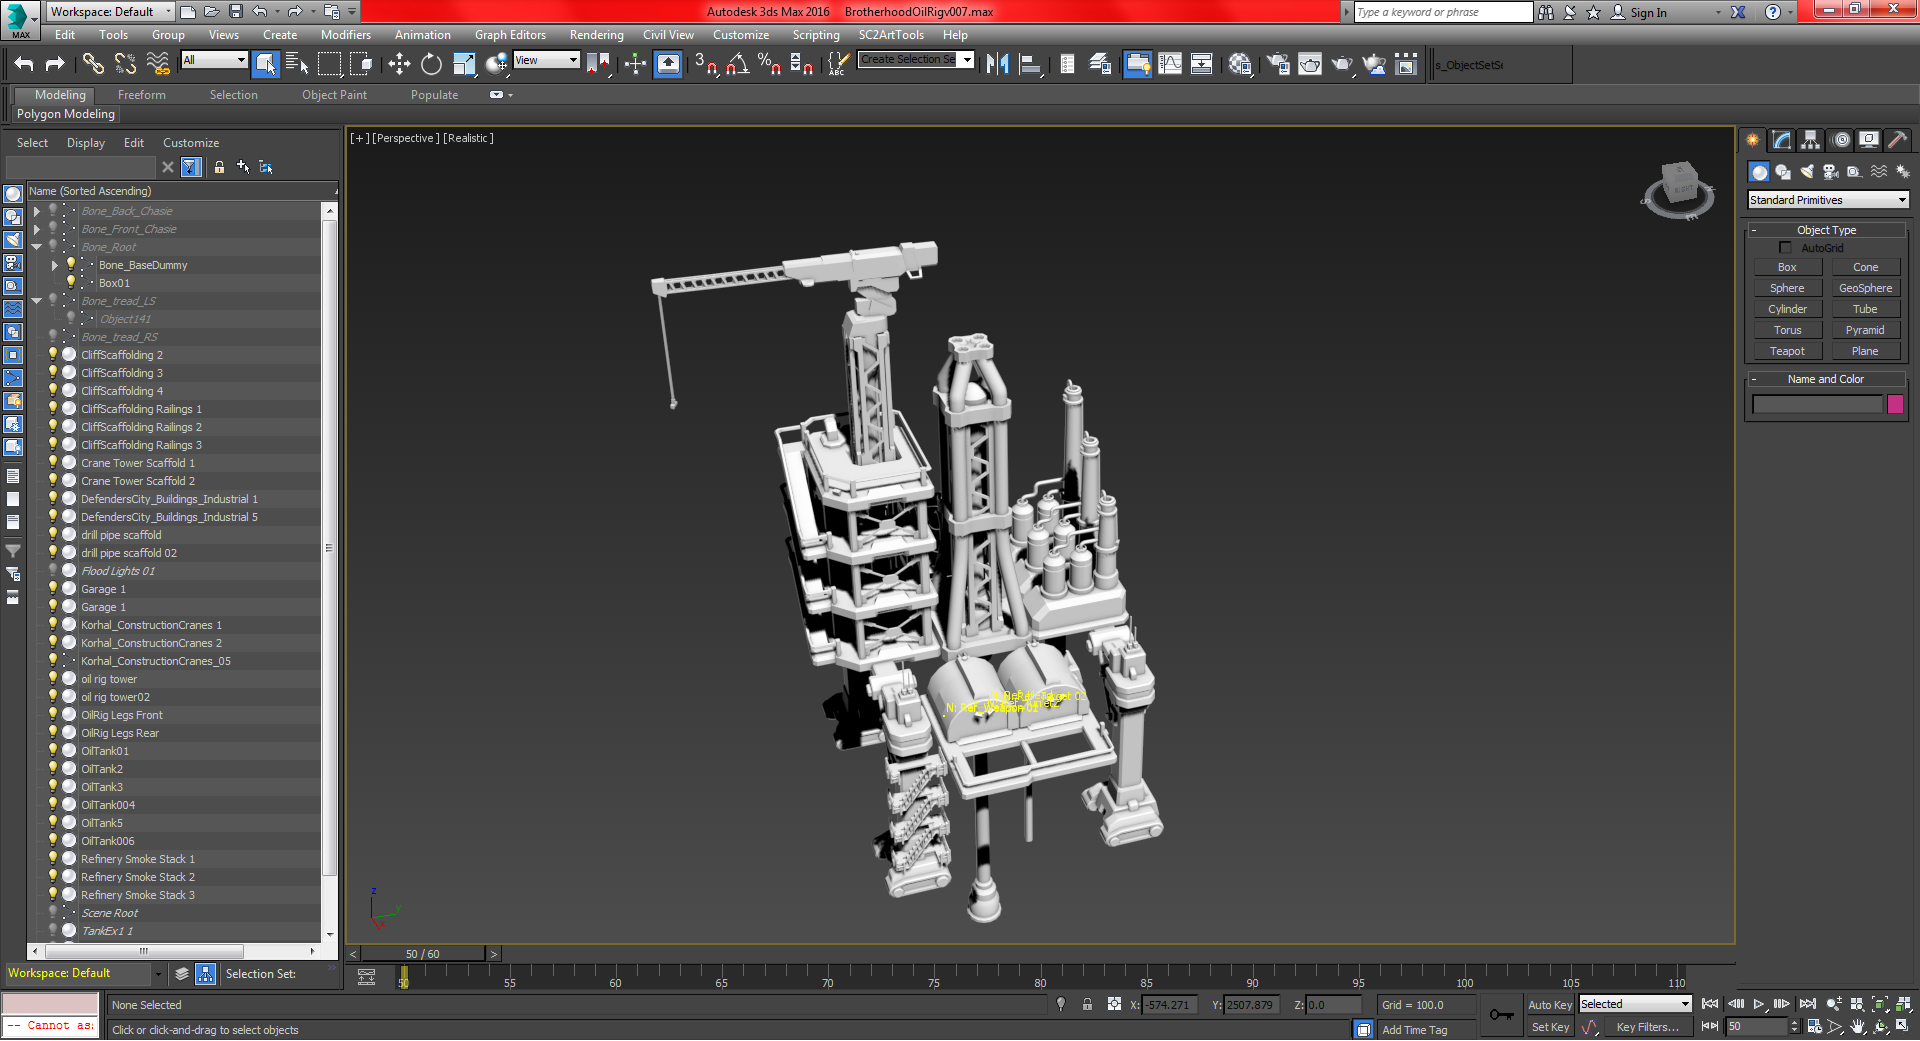 Brotherhood Off-Shore Amphibious Oil-Rig Crawler Thing Question Mark? v.007 WIP